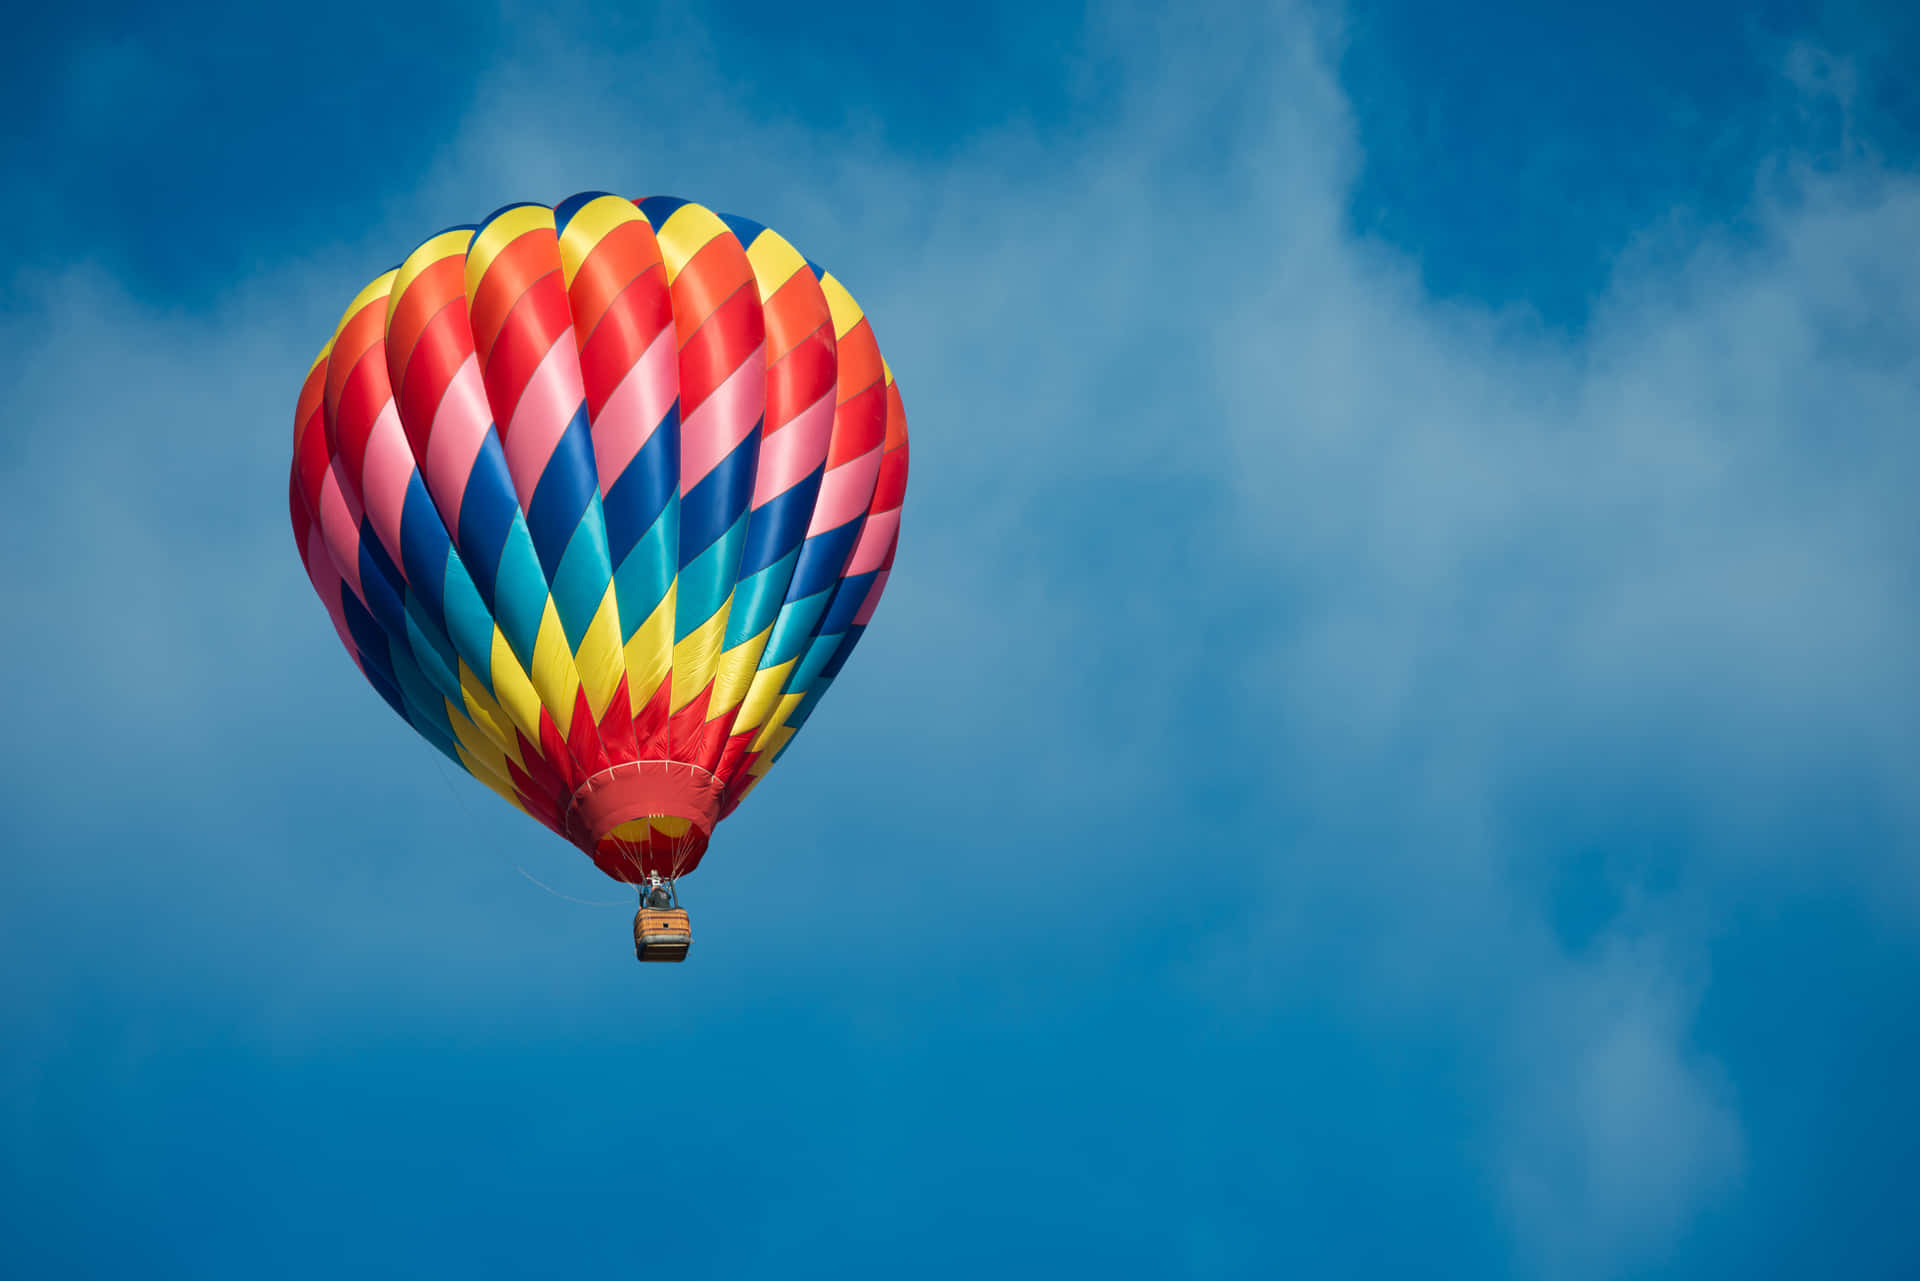 "Experience the magic of flight with a colorful hot air balloon!"